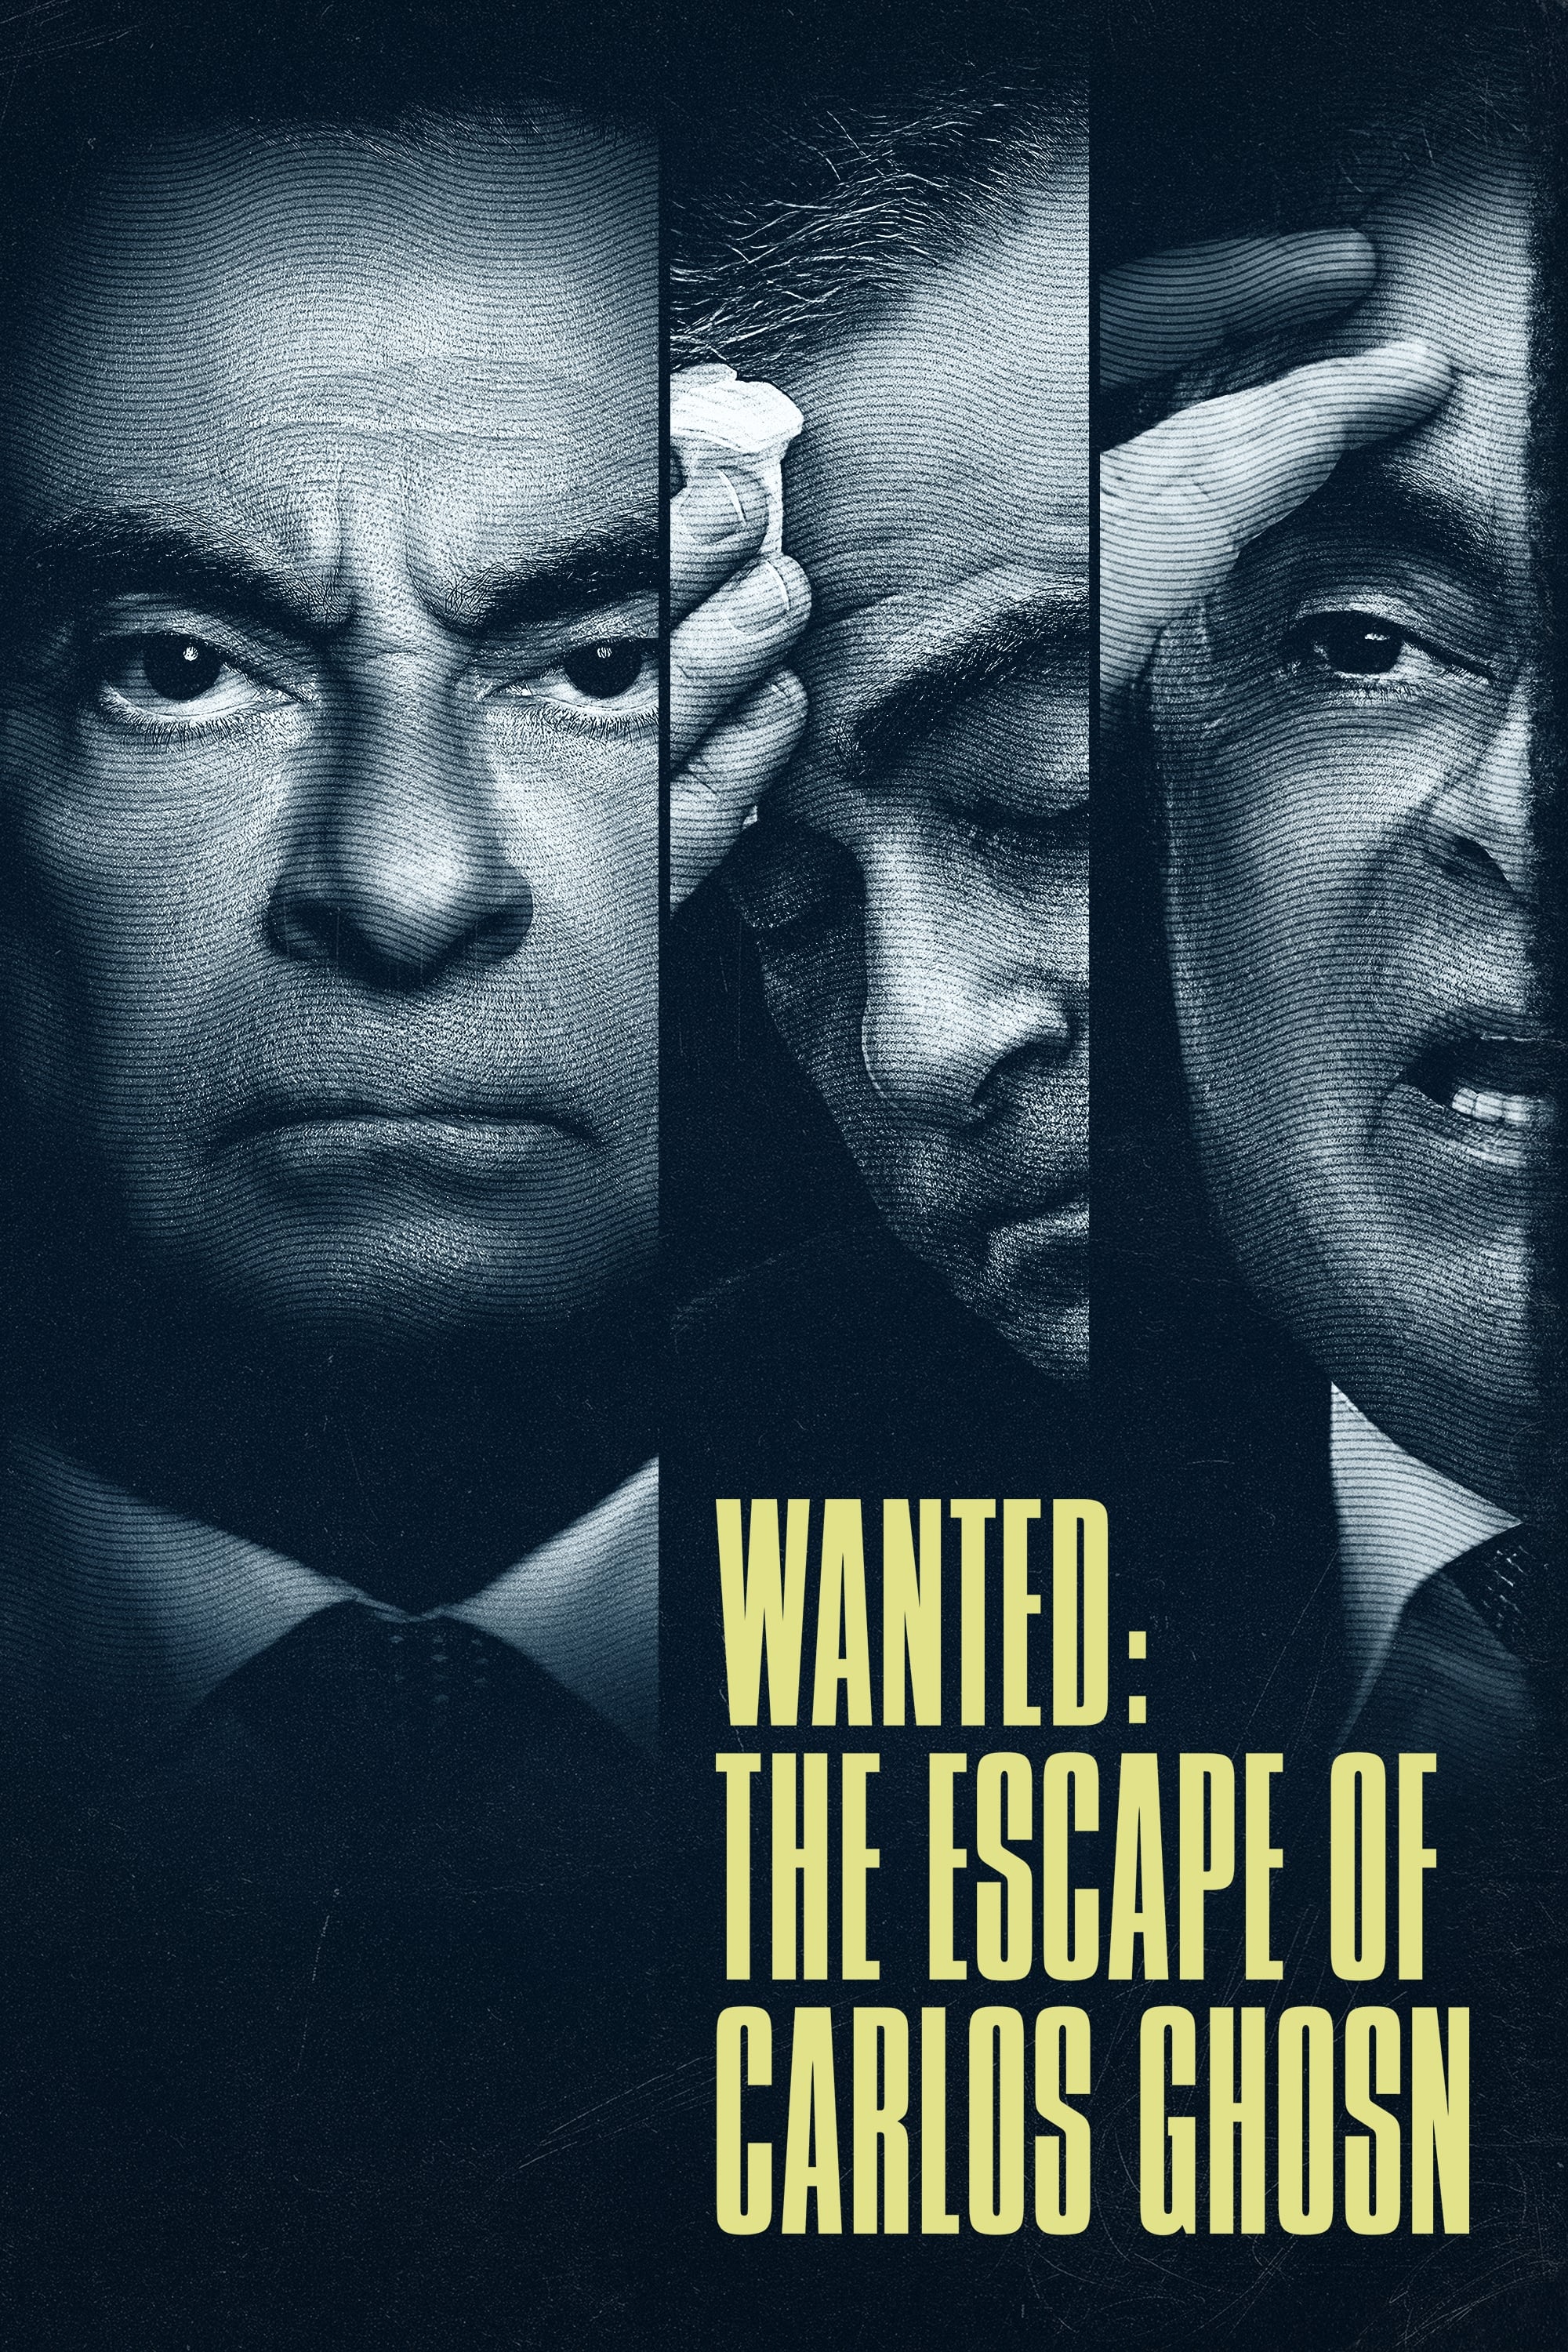 Wanted: The Escape of Carlos Ghosn TV Shows About Crime